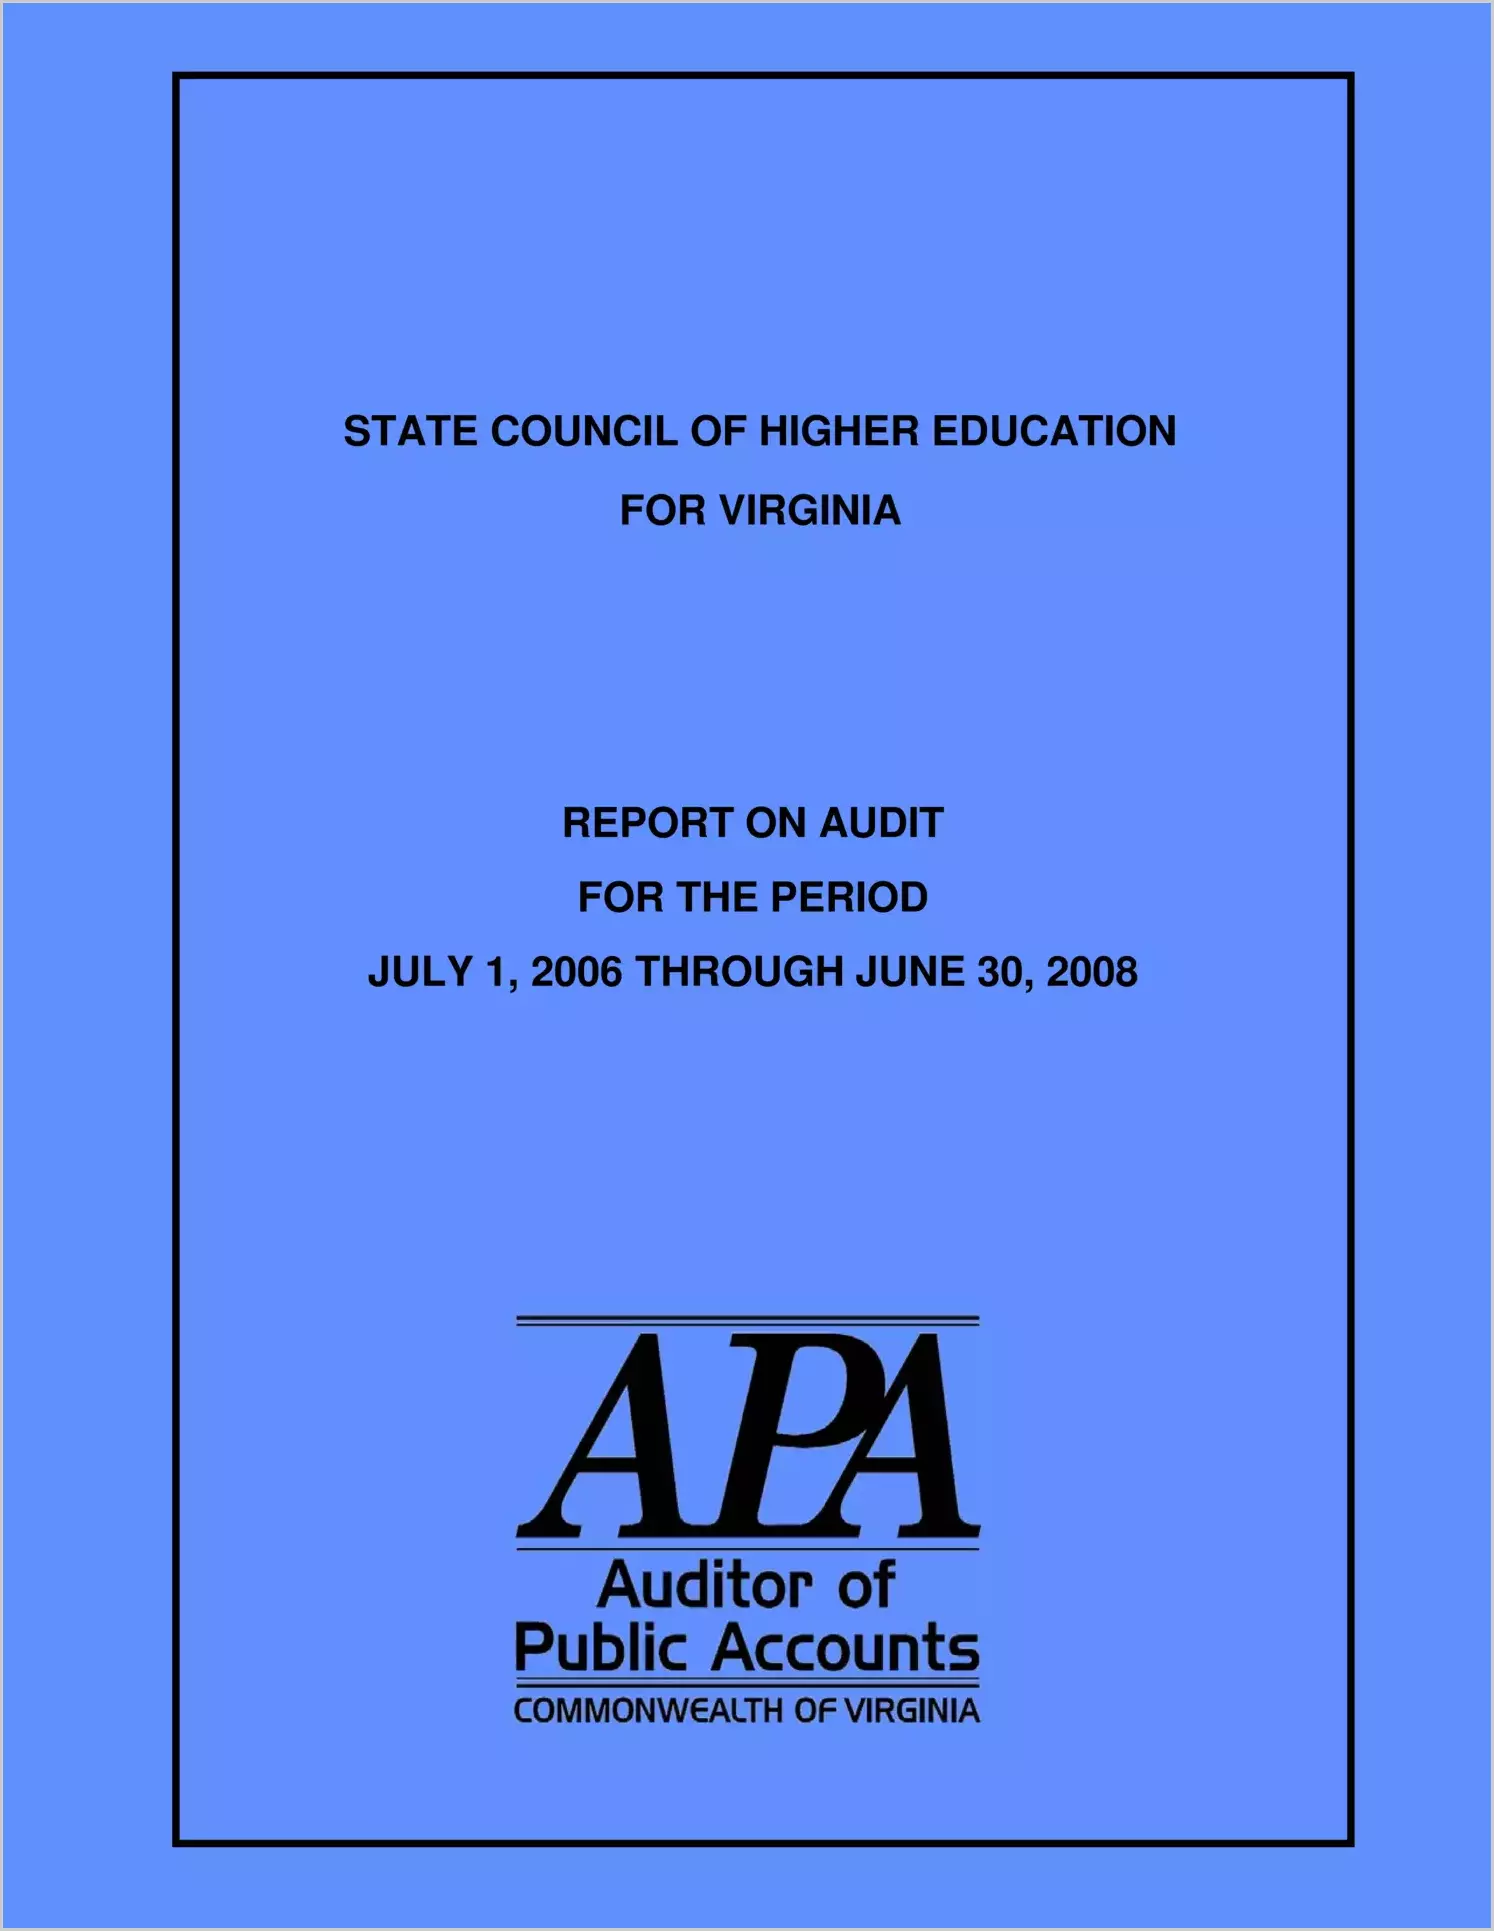 State Council of Higher Education for Virginia for the period July 1, 2006 through June 30, 2008